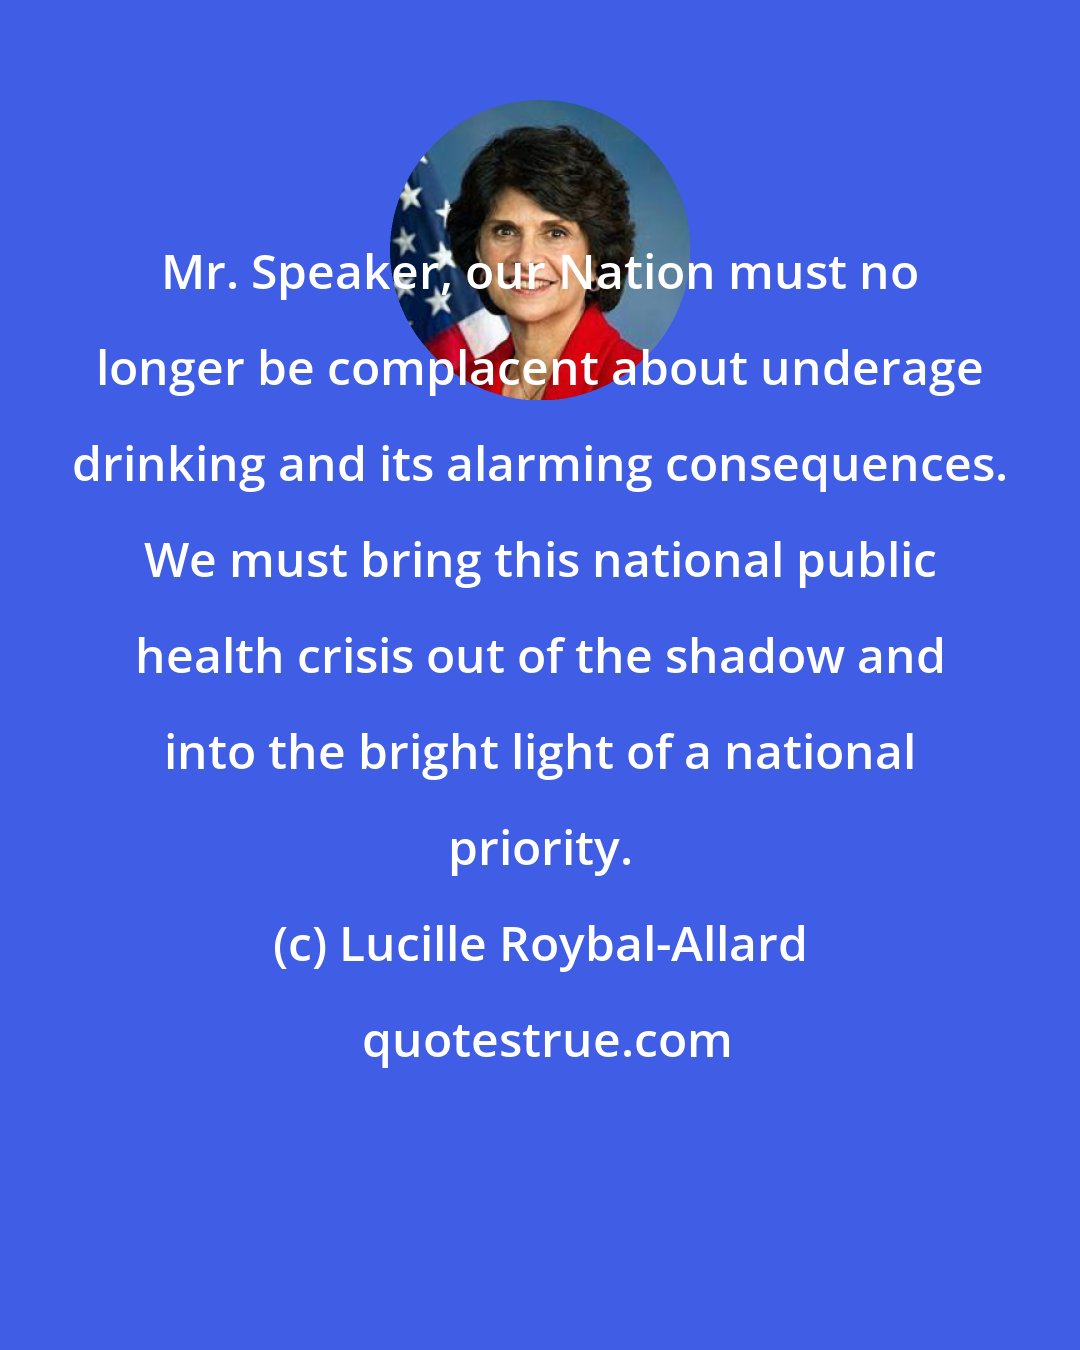 Lucille Roybal-Allard: Mr. Speaker, our Nation must no longer be complacent about underage drinking and its alarming consequences. We must bring this national public health crisis out of the shadow and into the bright light of a national priority.